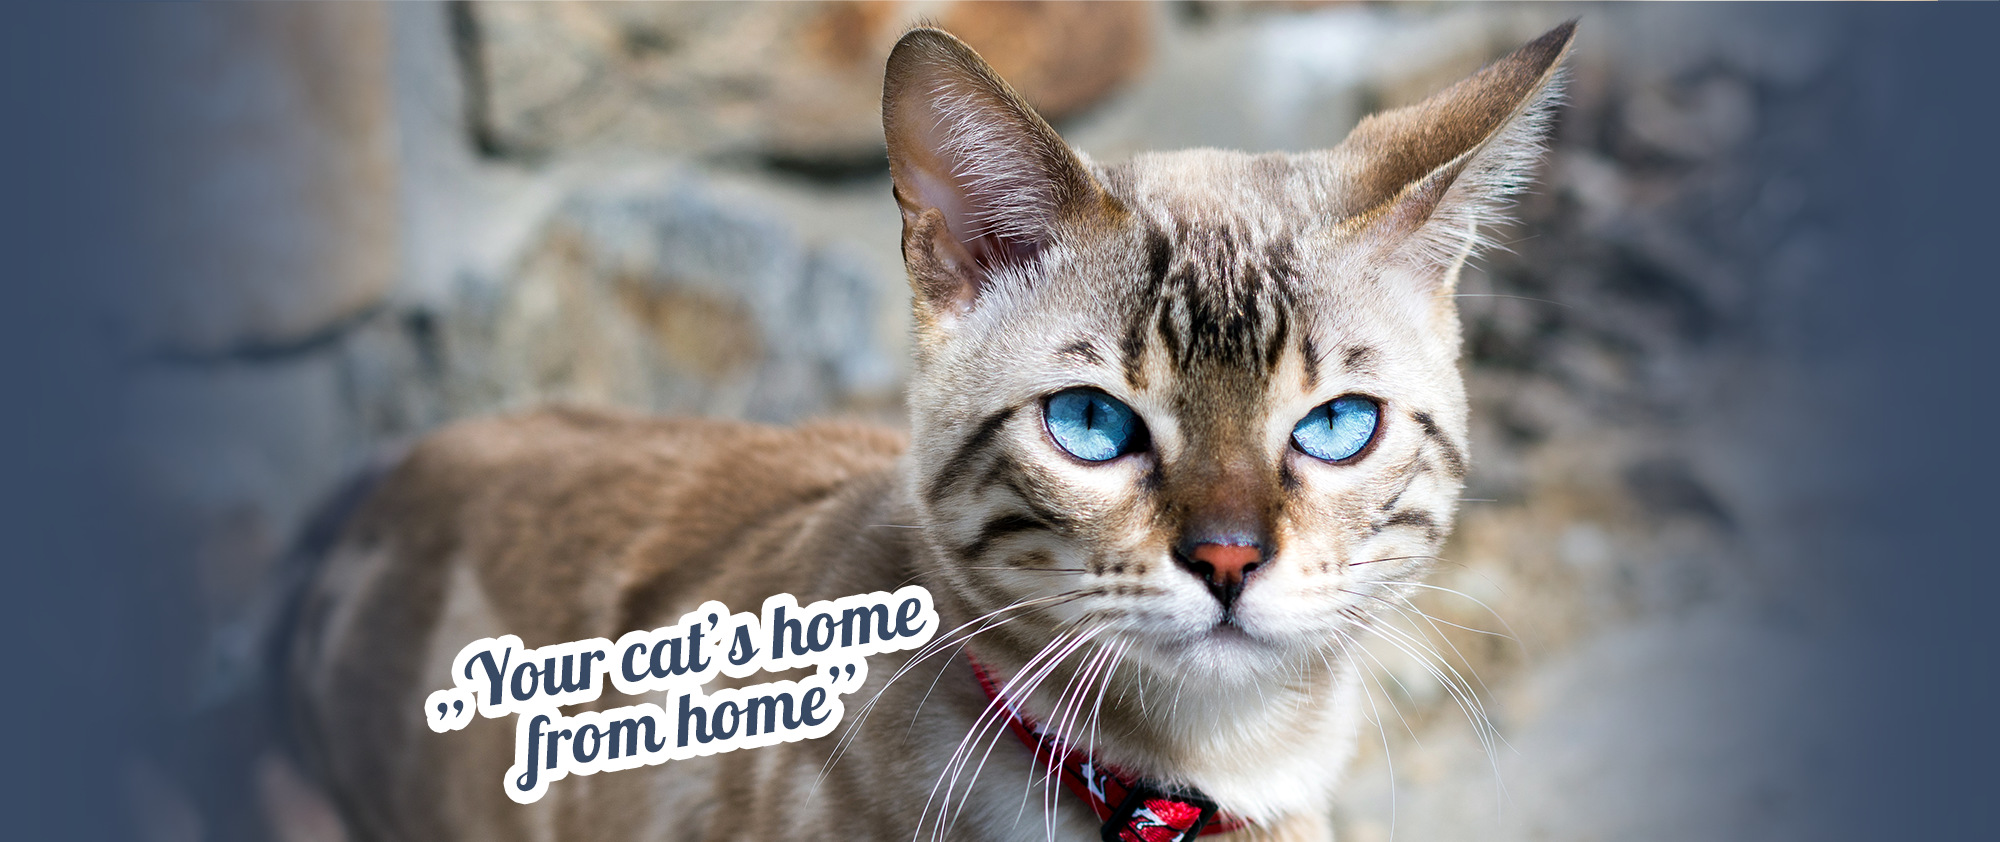 Your cat's home from home